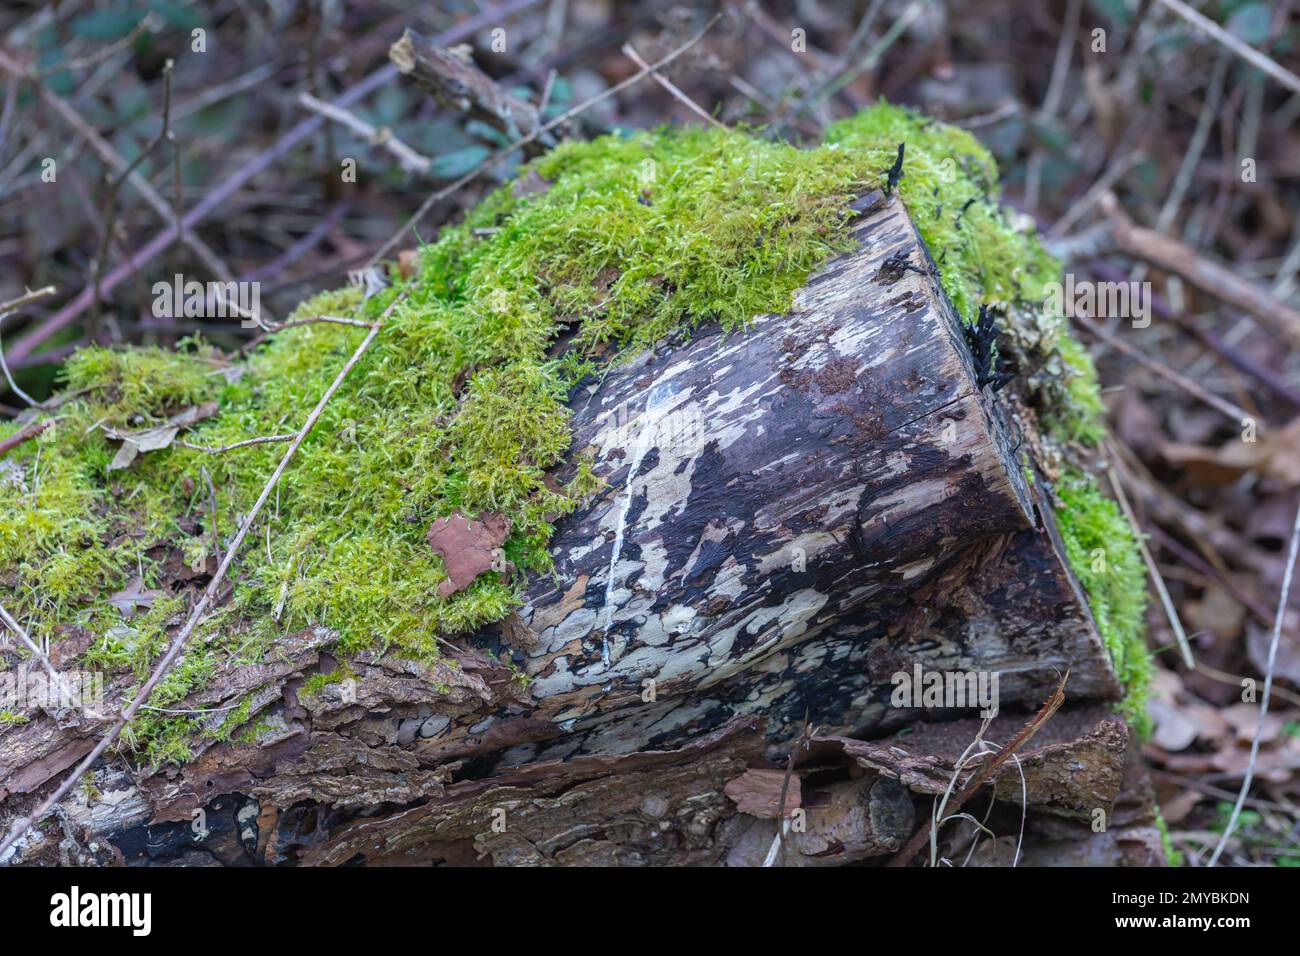 Ancient Plants - Close-up of Mosses growing on a felled tree trunk ( bryophytes ) Stock Photo